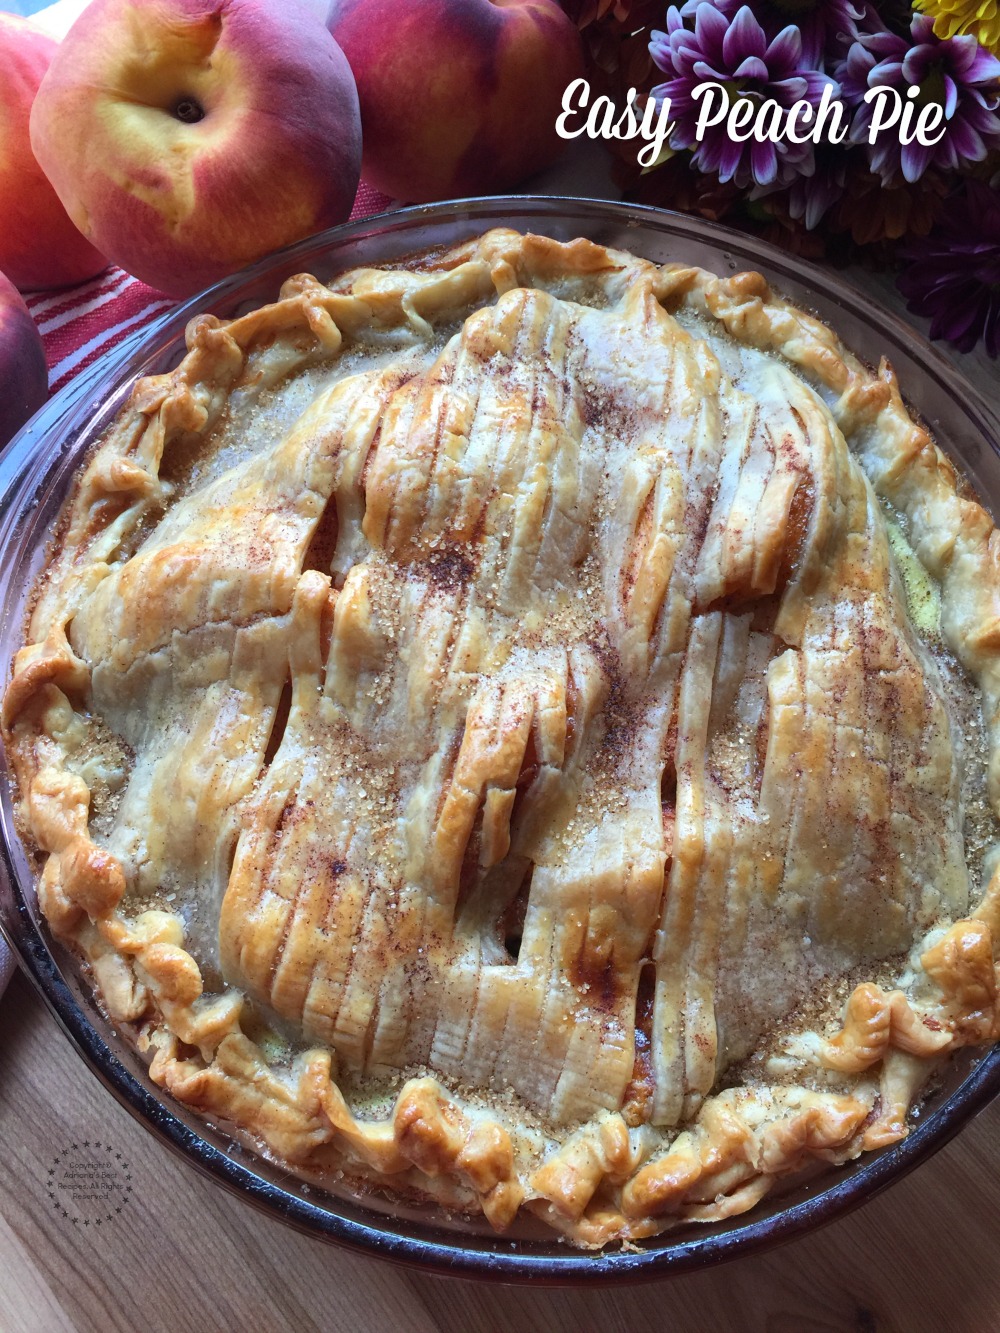 Peach pie, the perfect ending to a special holiday meal